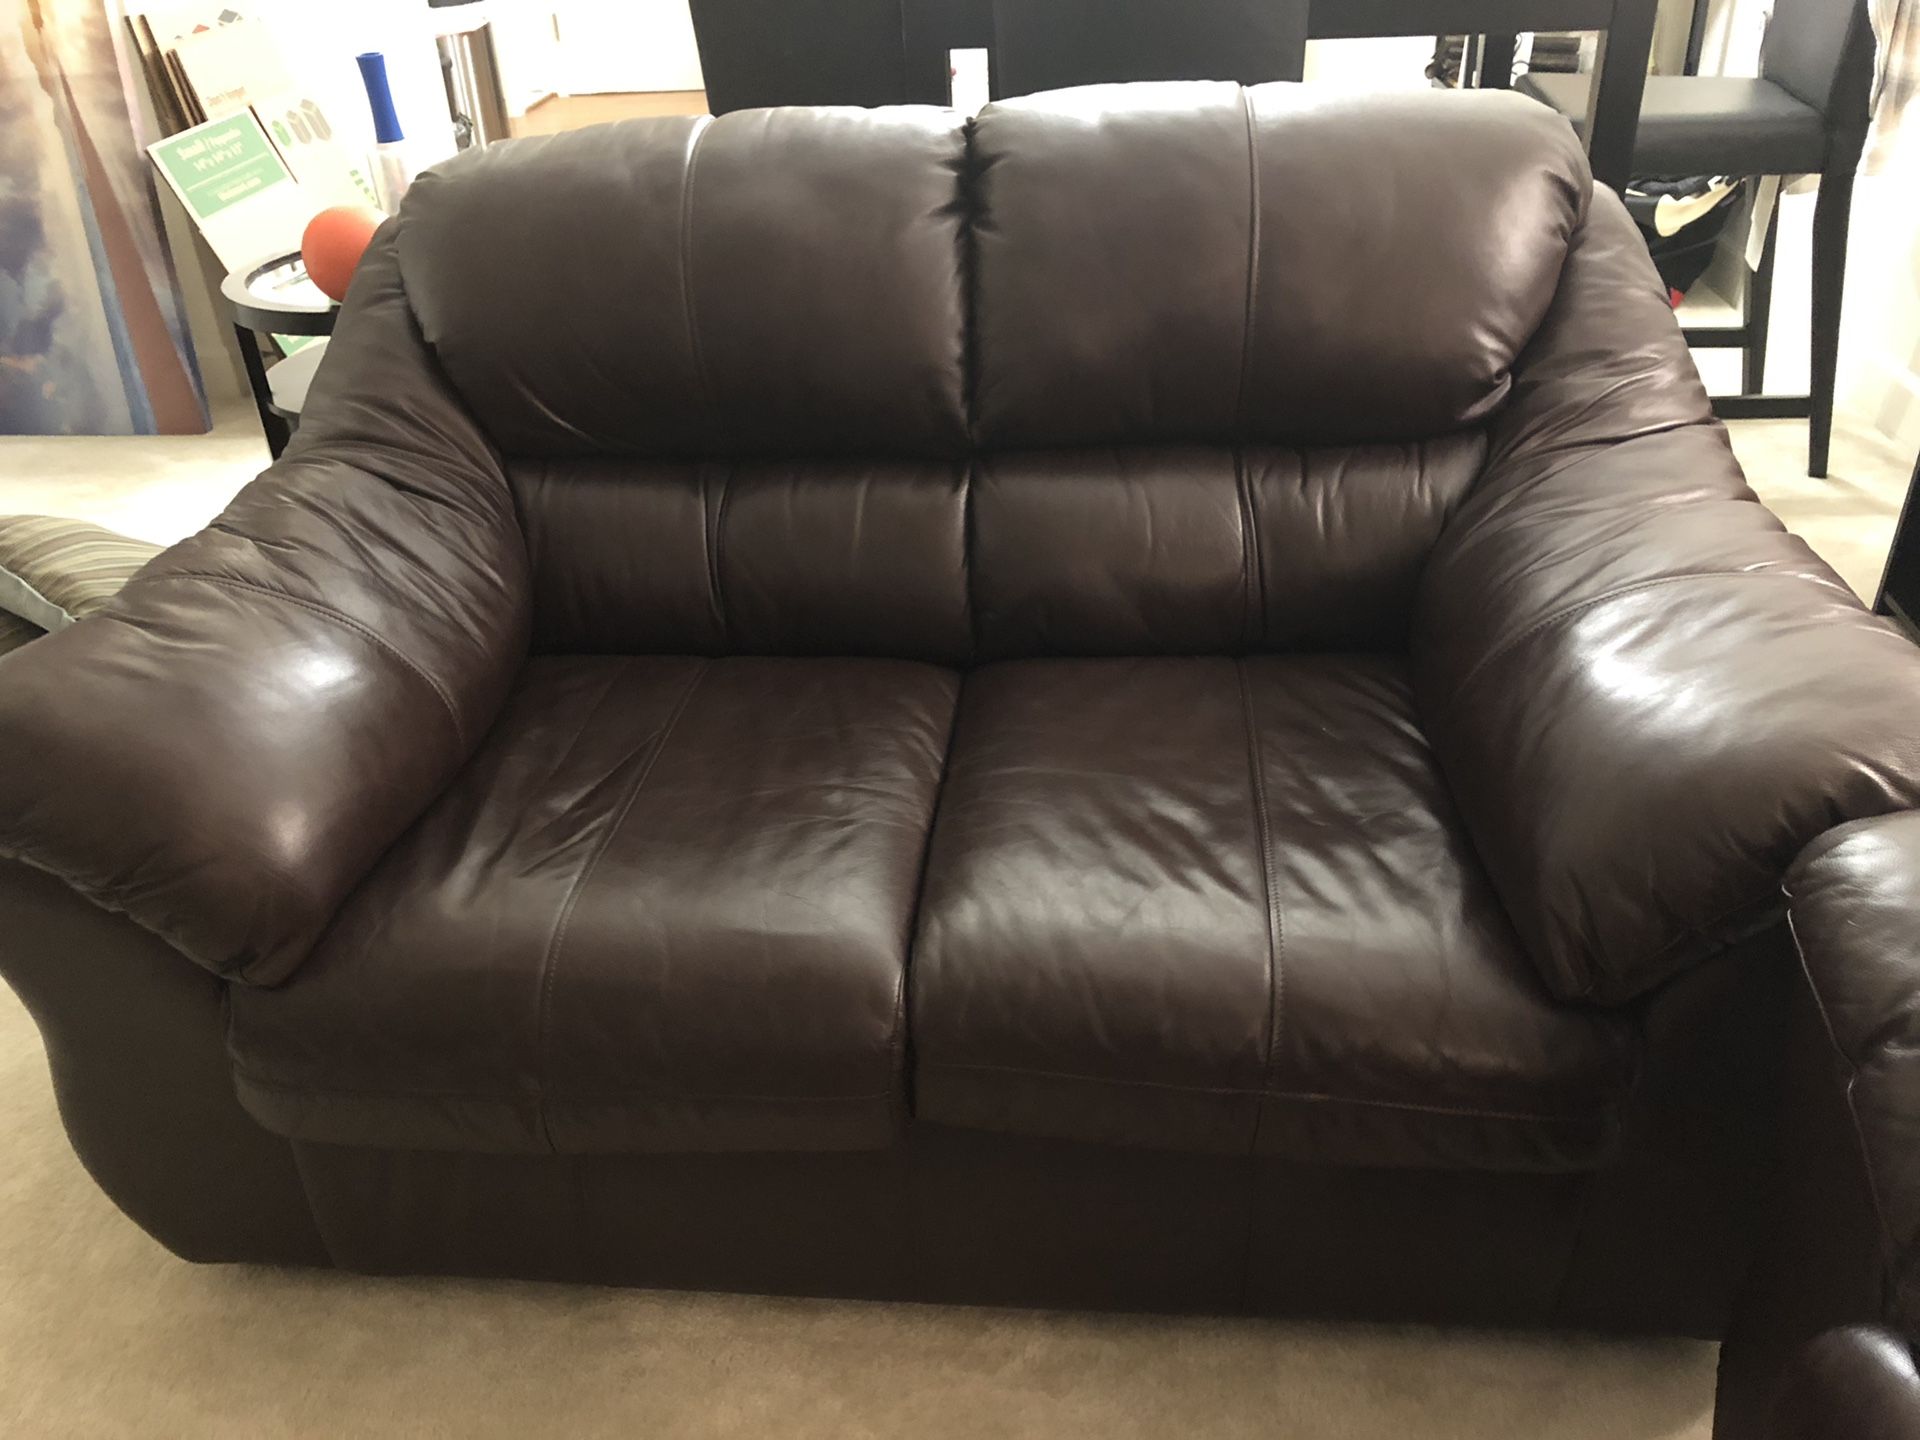 Leather sofas (good condition) with ottoman